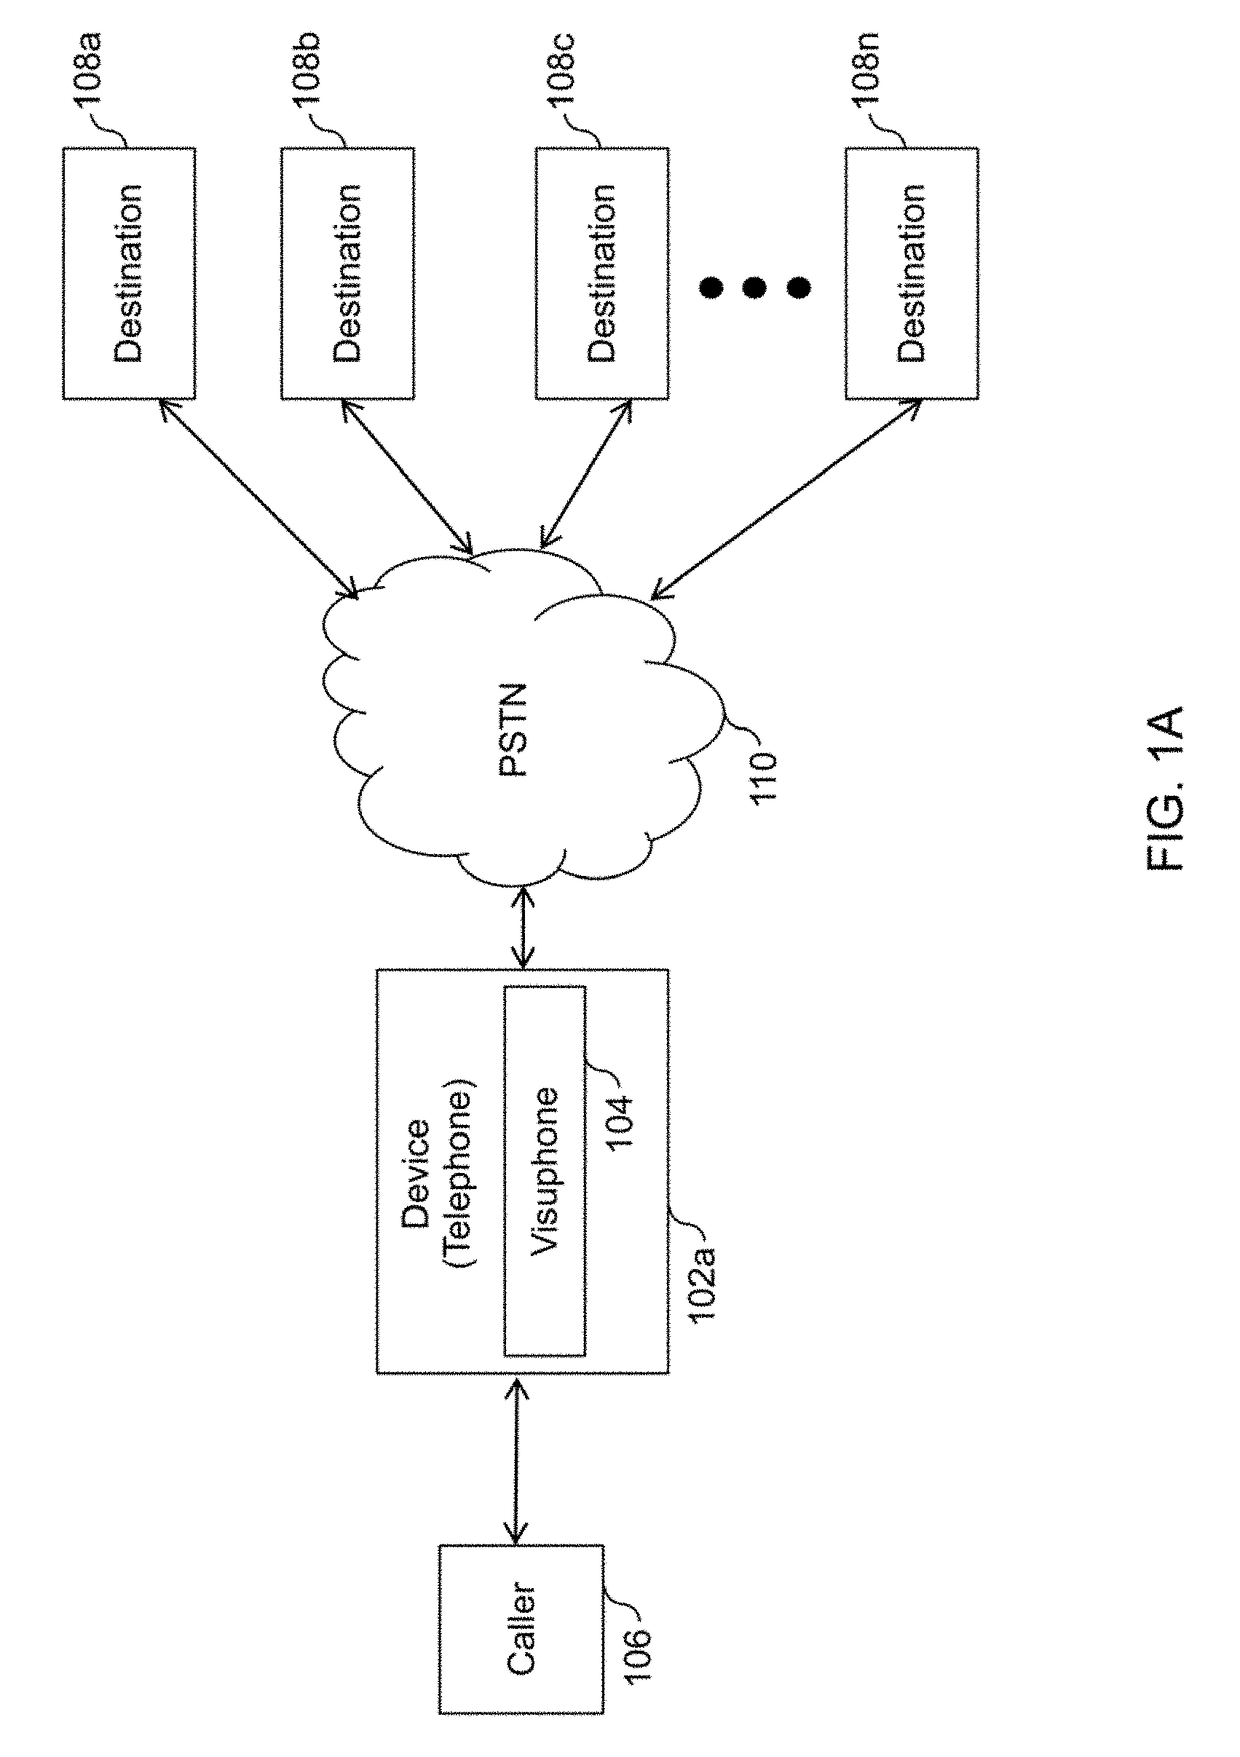 Systems and Methods for Visual Presentation and Selection of IVR Menu